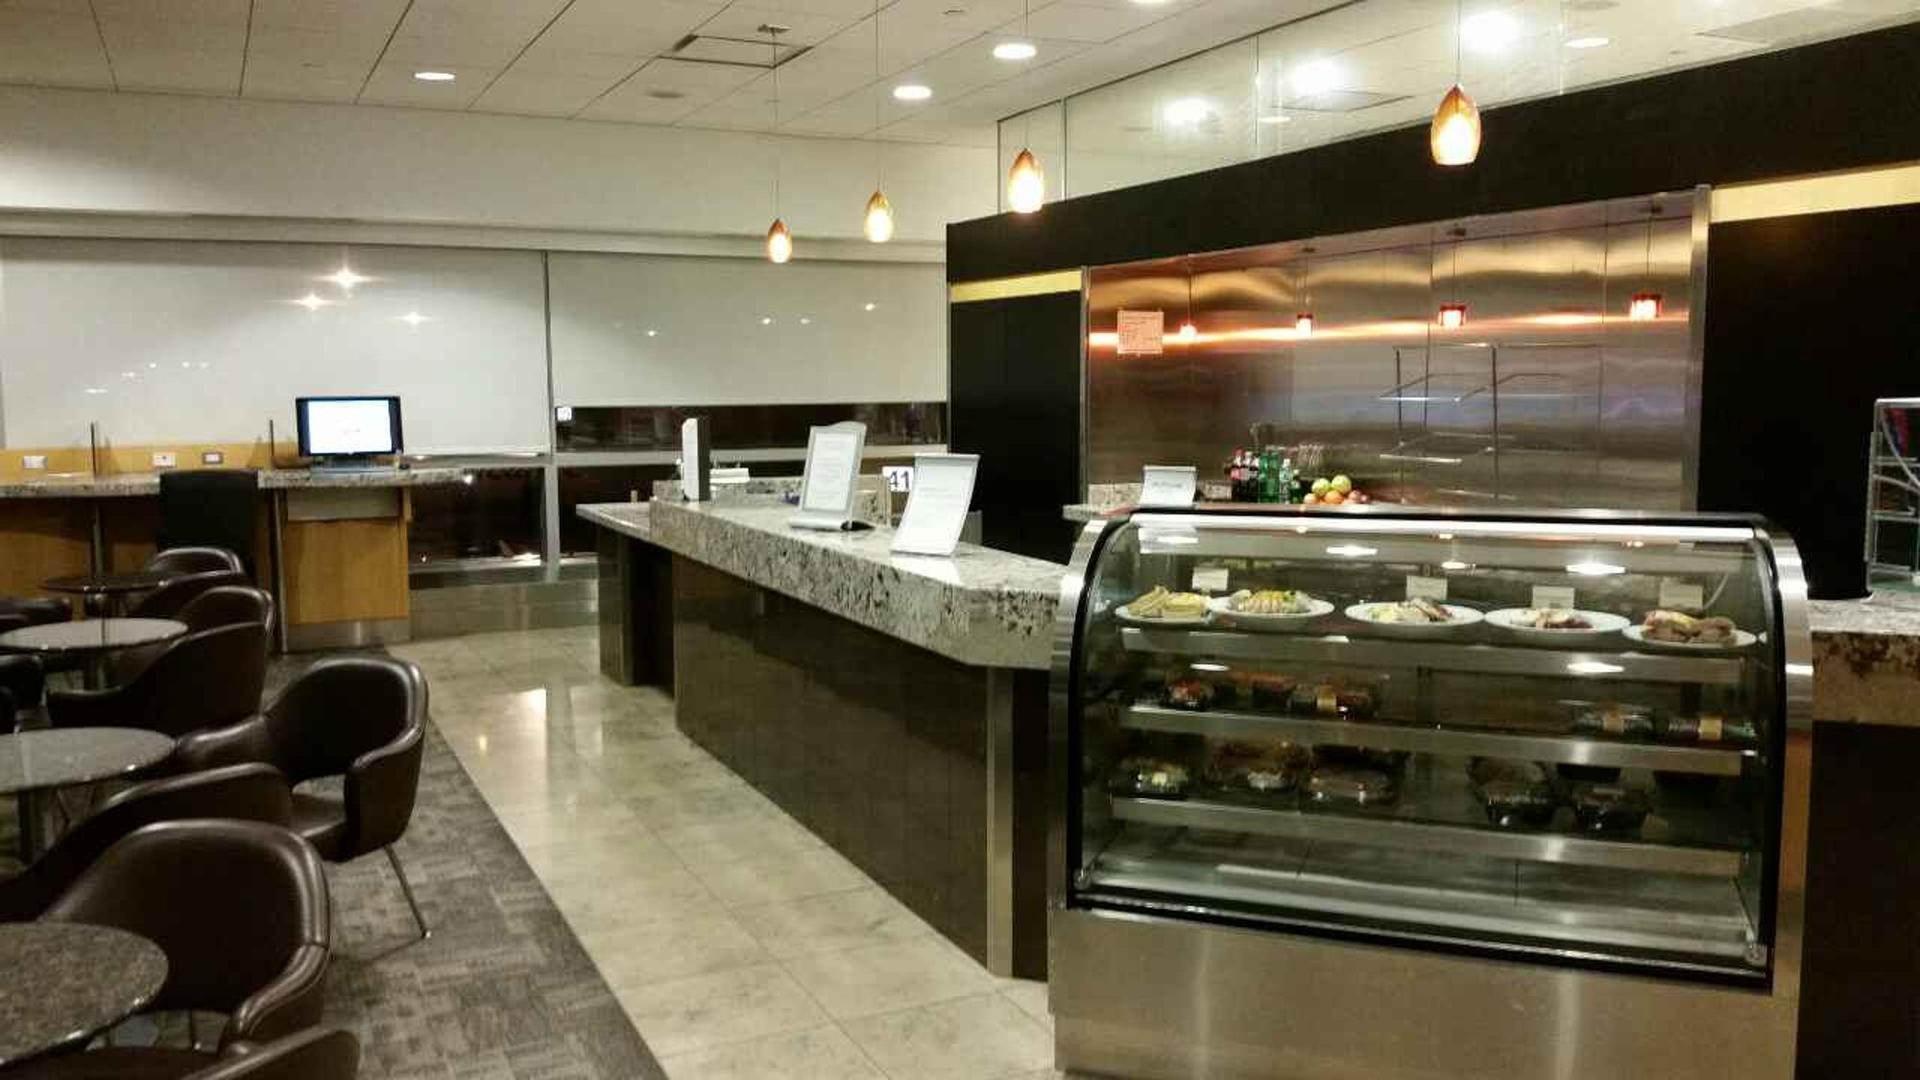 American Airlines Admirals Club image 21 of 25